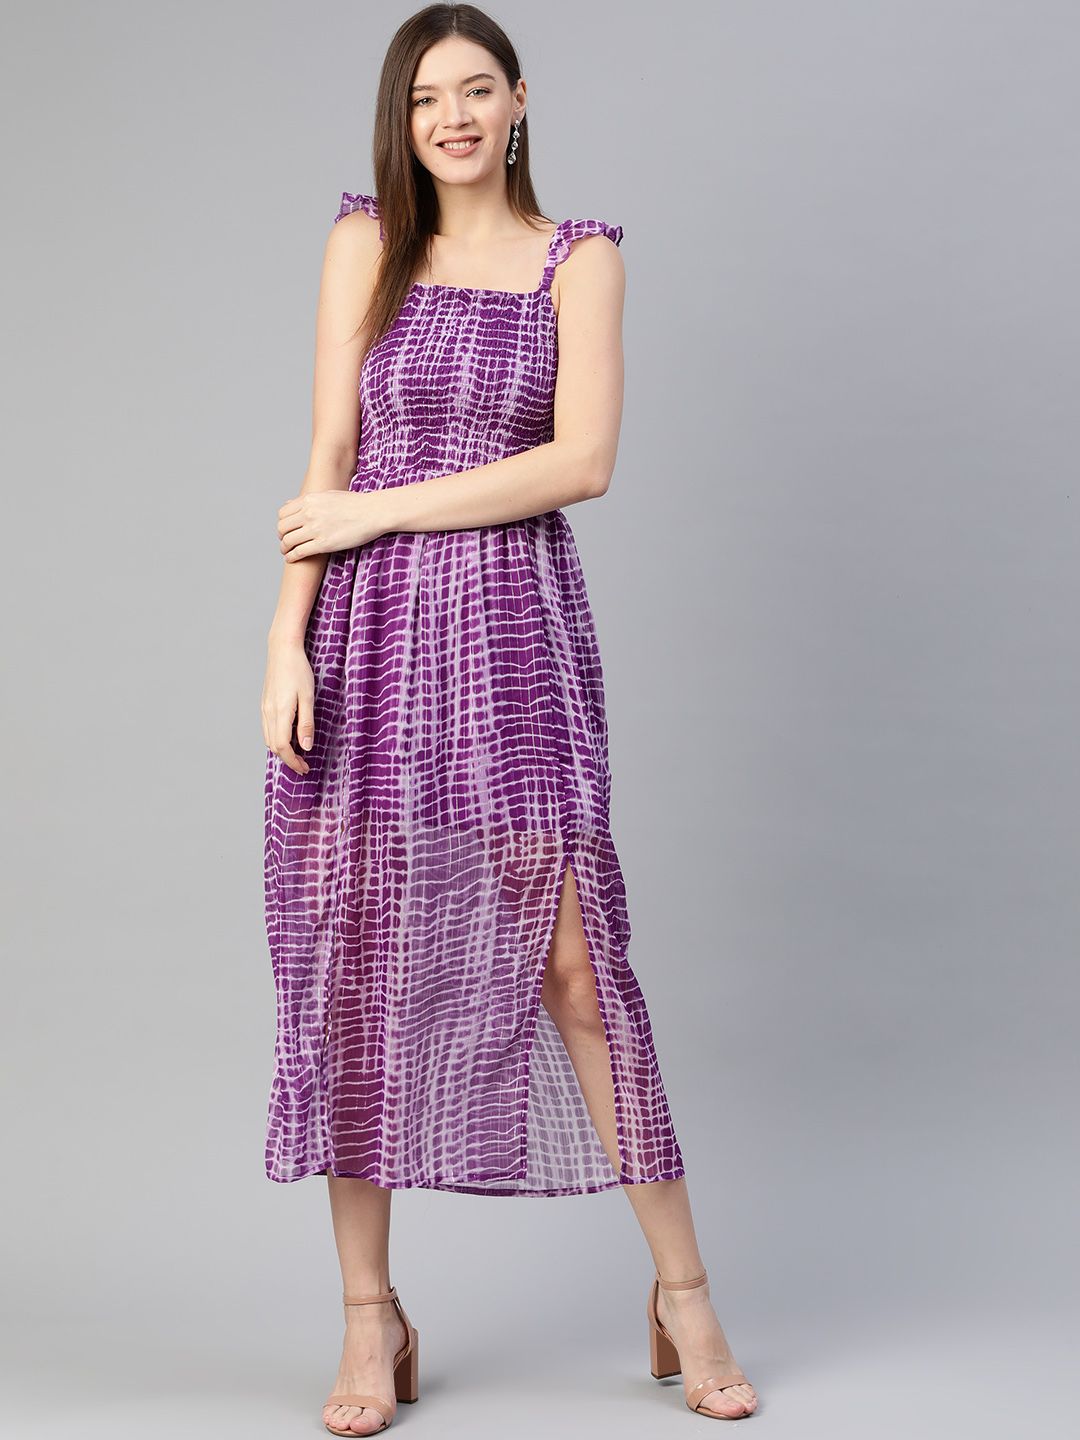 Pluss Chic Purple and White Dyed Smocked Dress Price in India